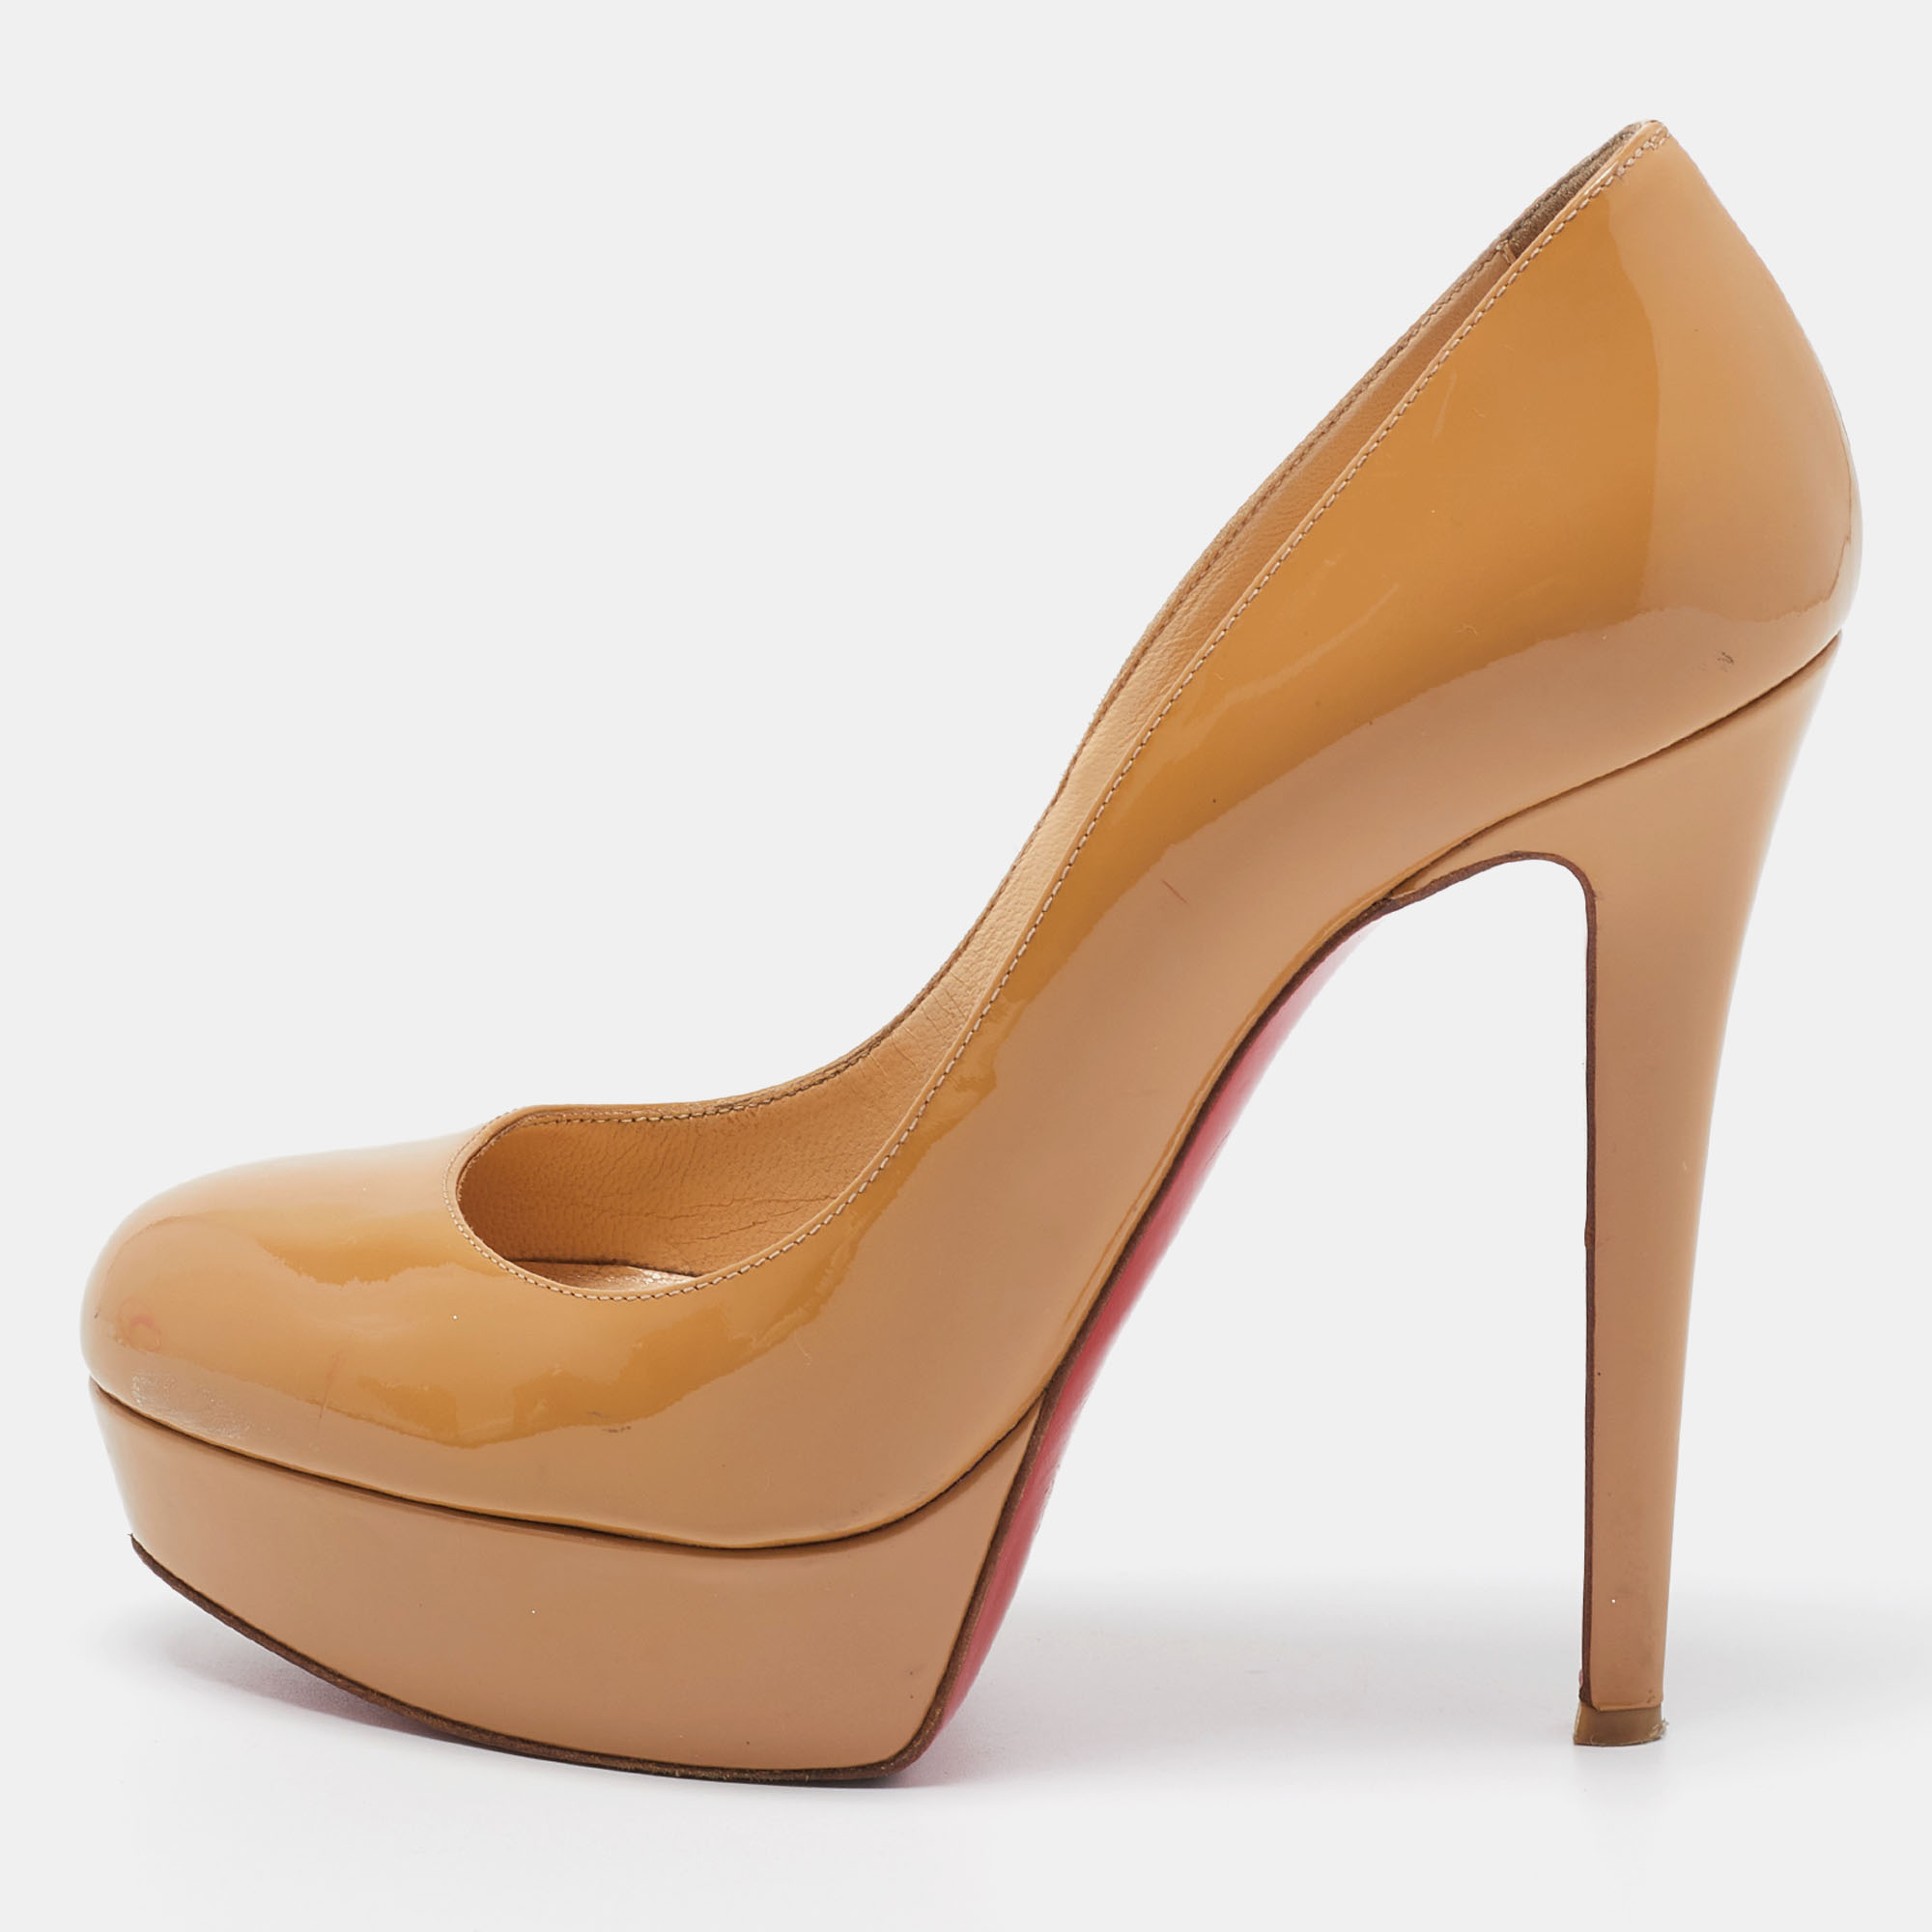 Pre-owned Christian Louboutin Beige Patent Leather Bianca Pumps Size 37